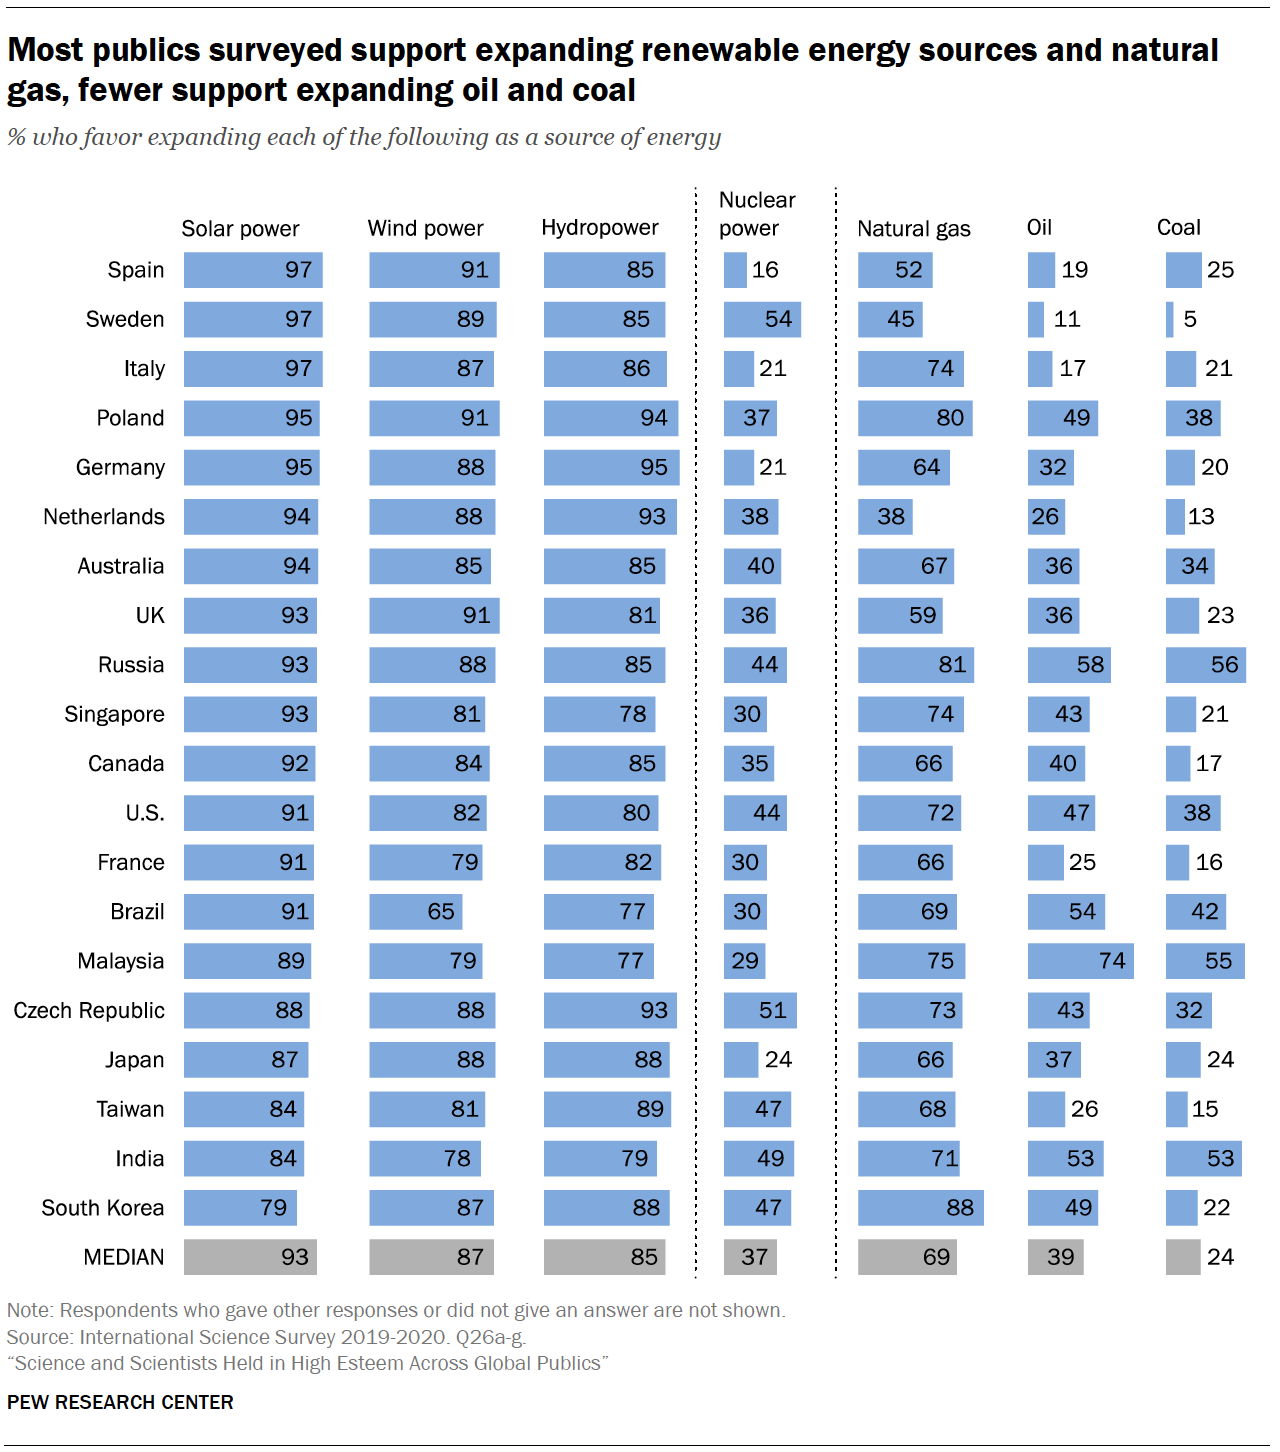 Chart shows most publics surveyed support expanding renewable energy sources and natural gas, fewer support expanding oil and coal